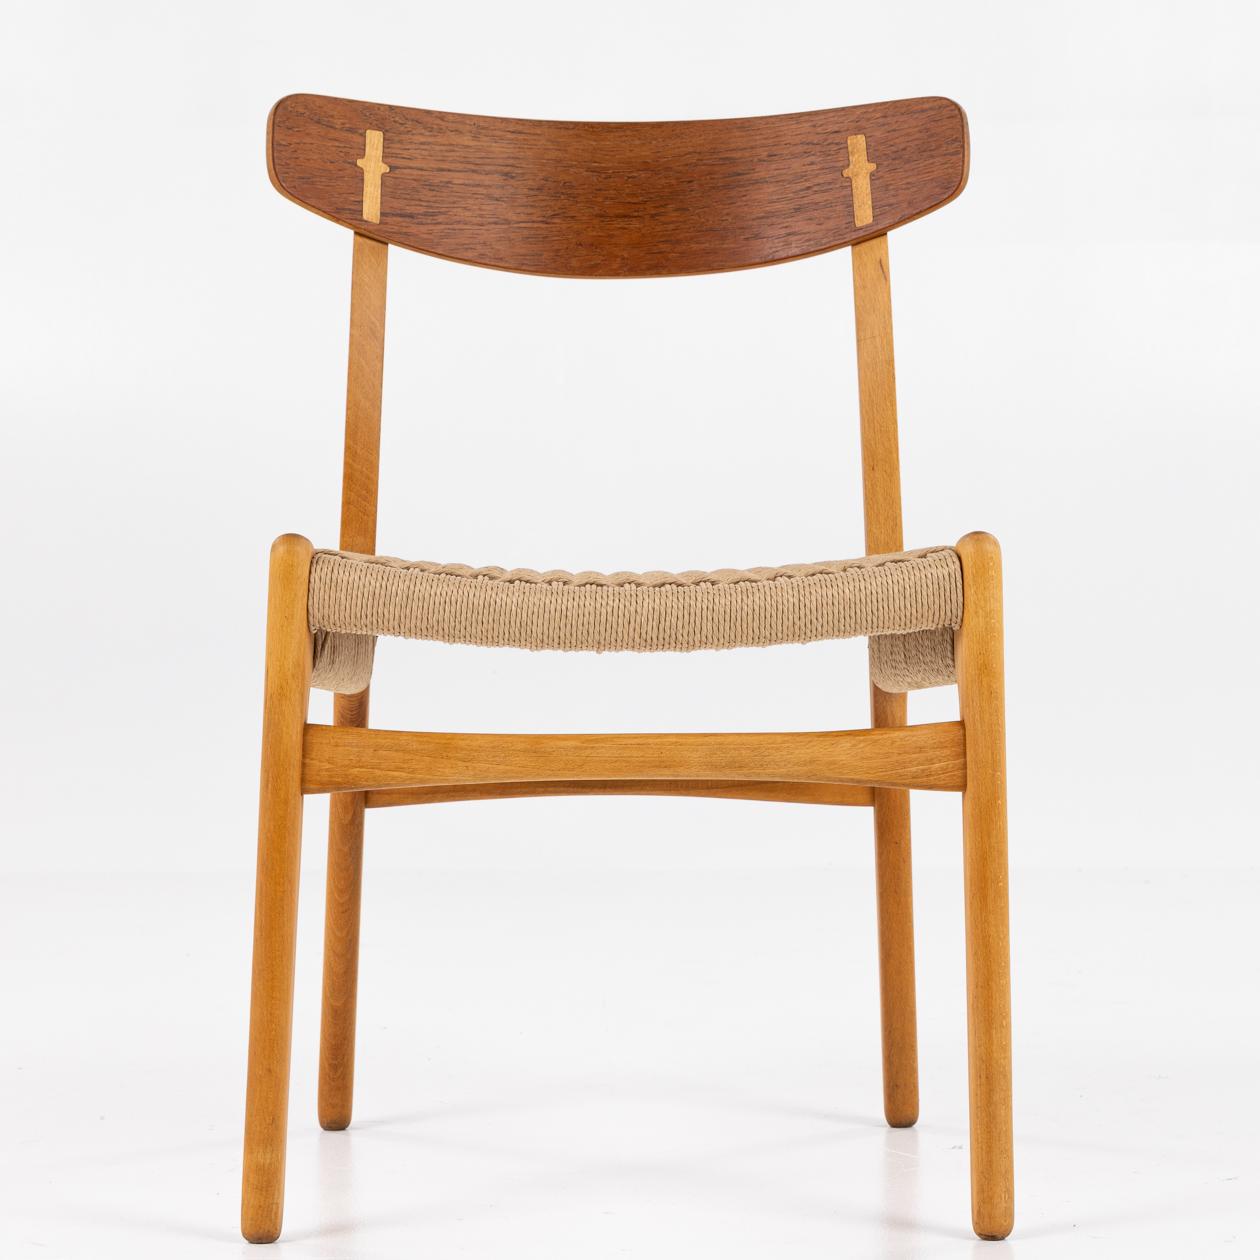 CH 23 - Dining chair in teak and beech with seat in new paper cord. Hans J. Wegner / Carl Hansen